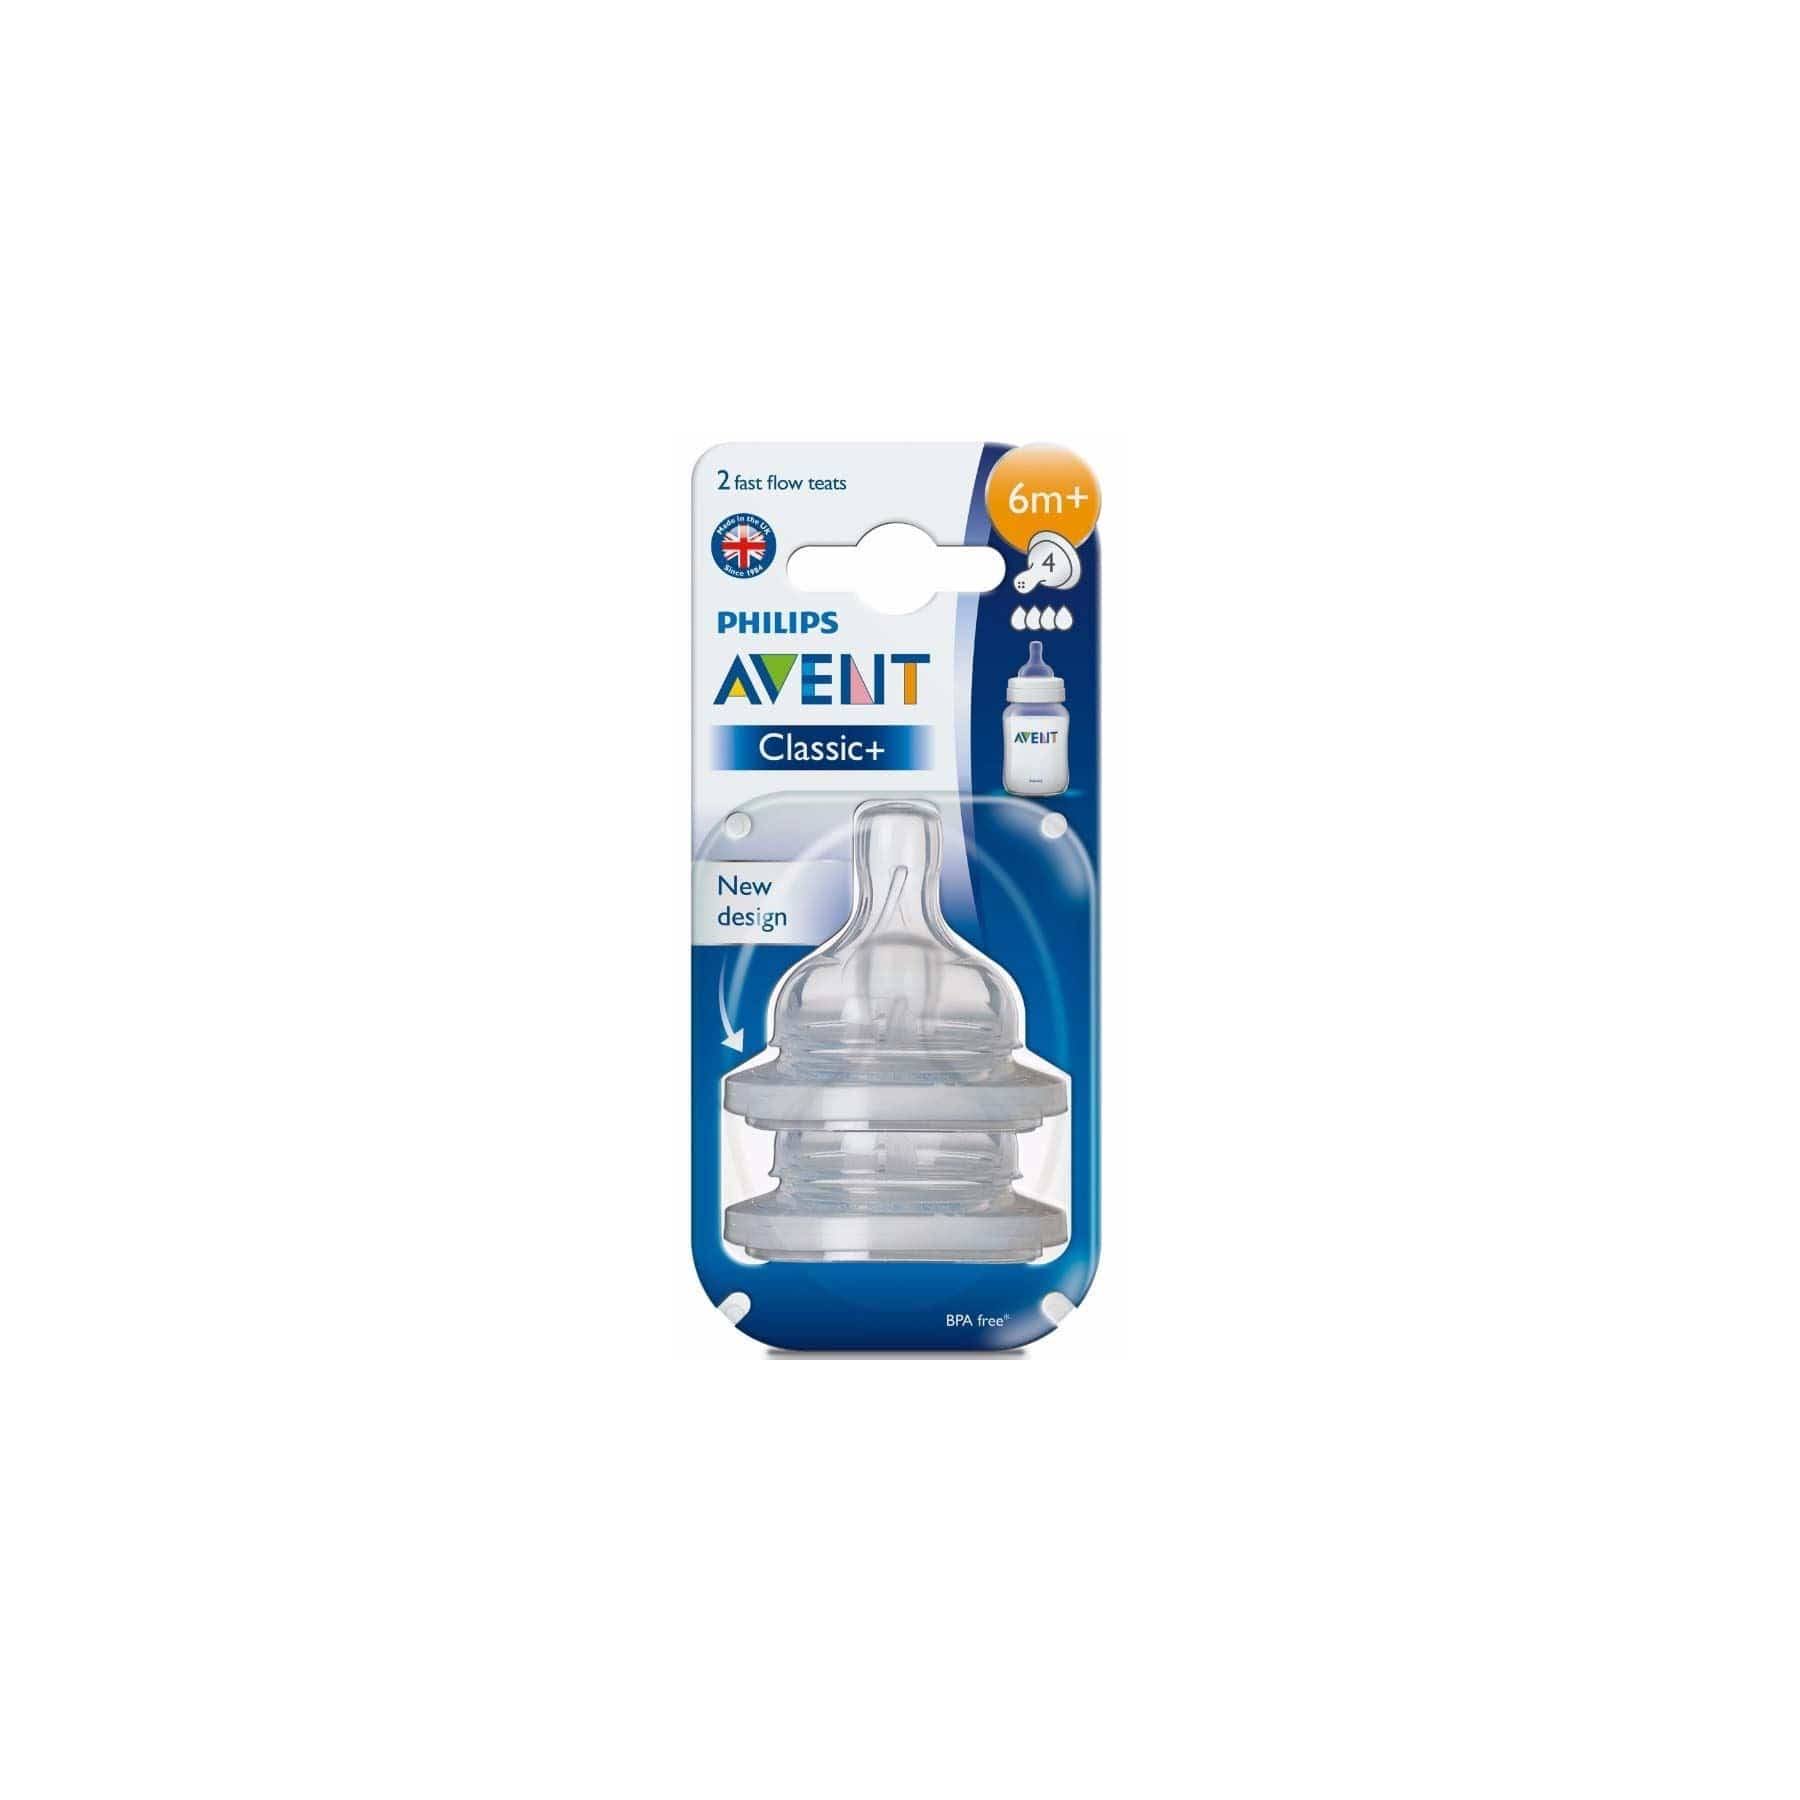 Philips Avent Classic Silicone Teat - 2 Fast Flow Teats